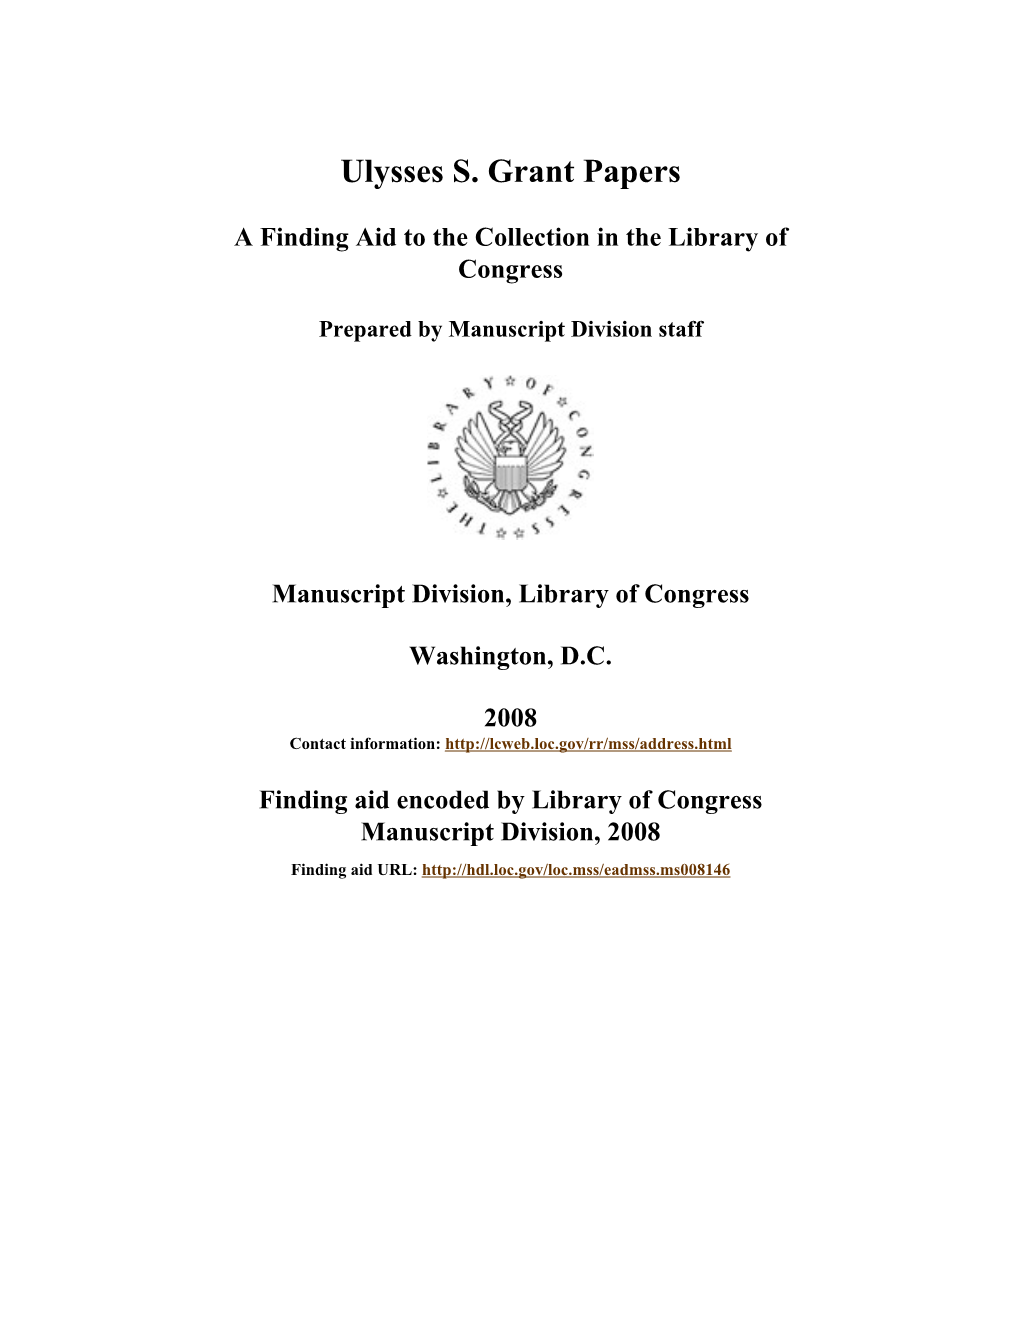 Ulysses S. Grant Papers [Finding Aid]. Library of Congress. [PDF Rendered